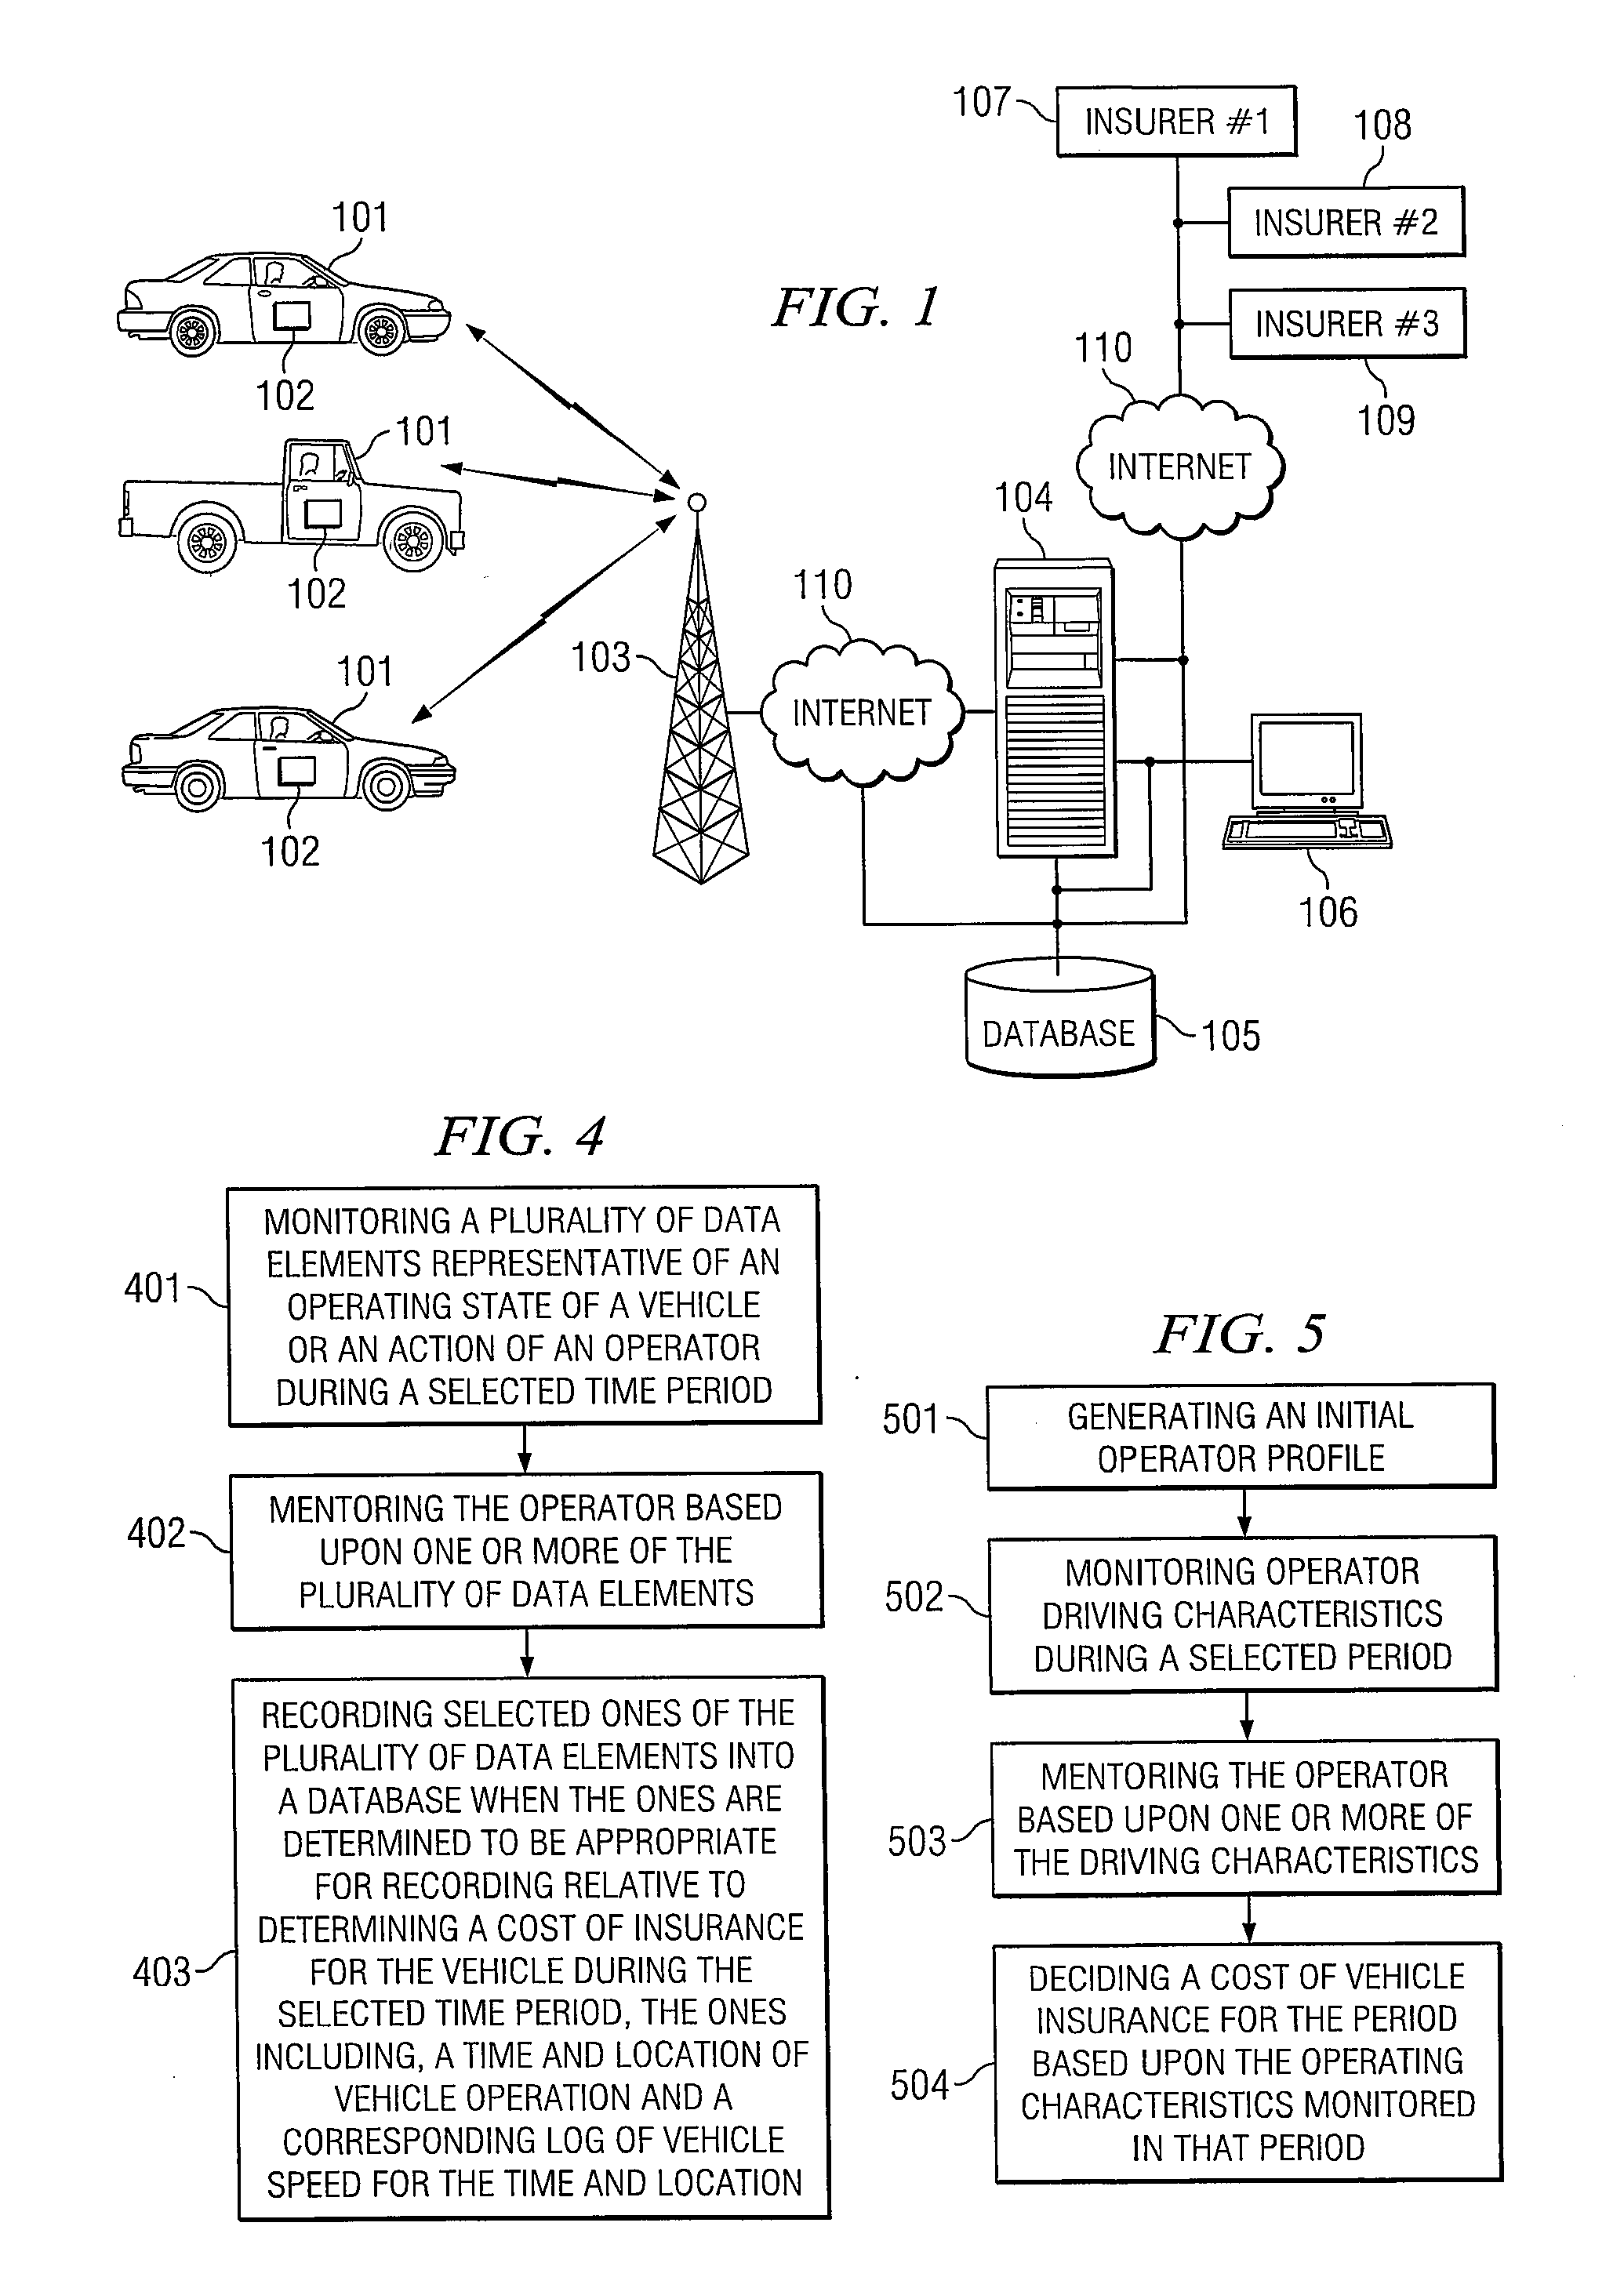 System and Method for Categorizing Driving Behavior Using Driver Mentoring and/or Monitoring Equipment to Determine an Underwriting Risk